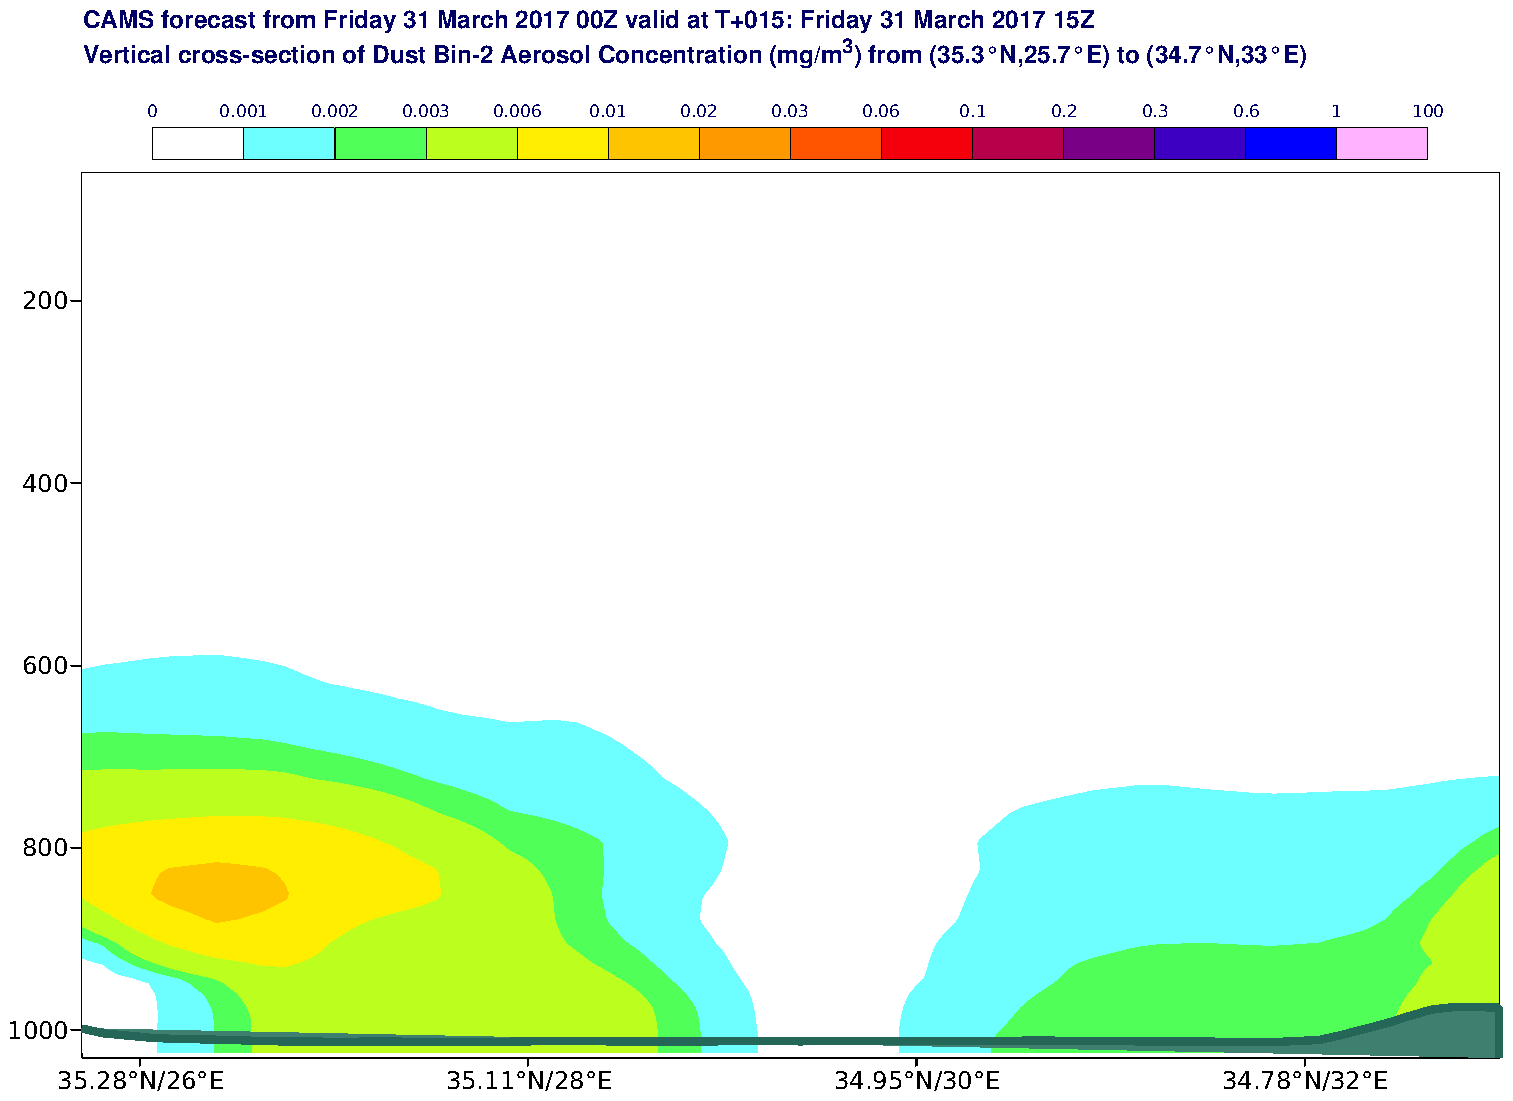 Vertical cross-section of Dust Bin-2 Aerosol Concentration (mg/m3) valid at T15 - 2017-03-31 15:00